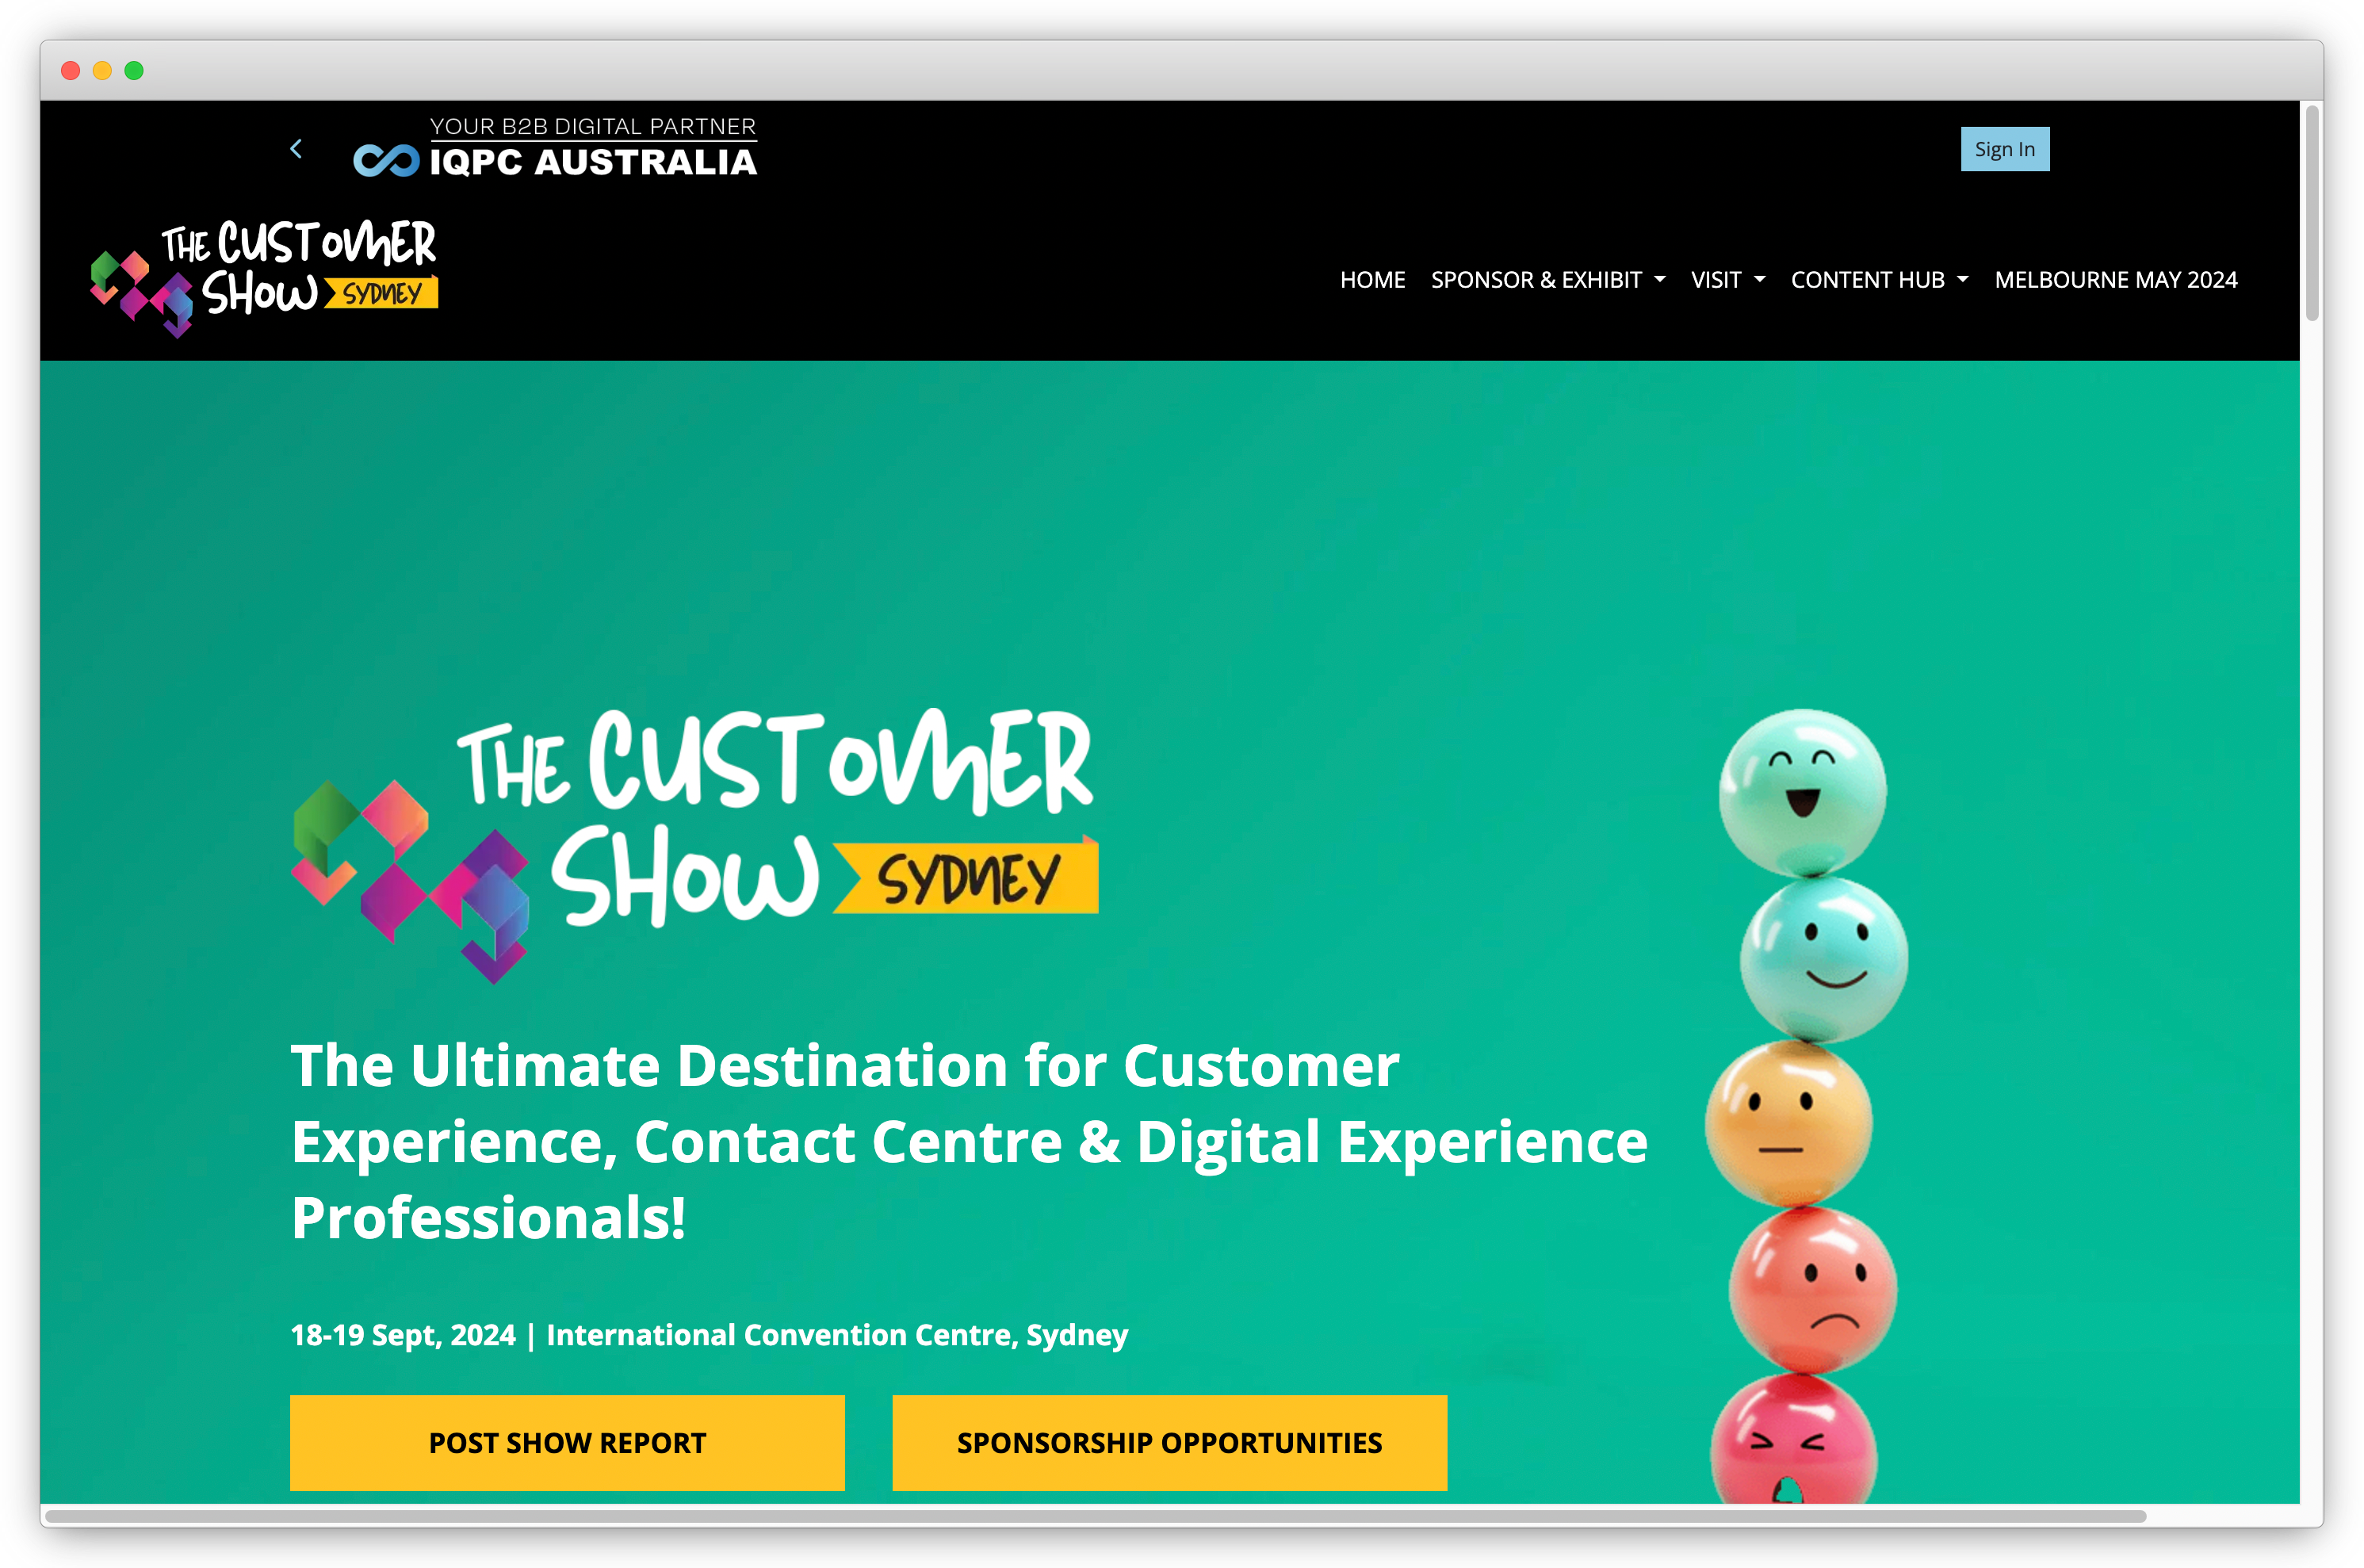 CX Events 2024 - The Customer Show Sydney